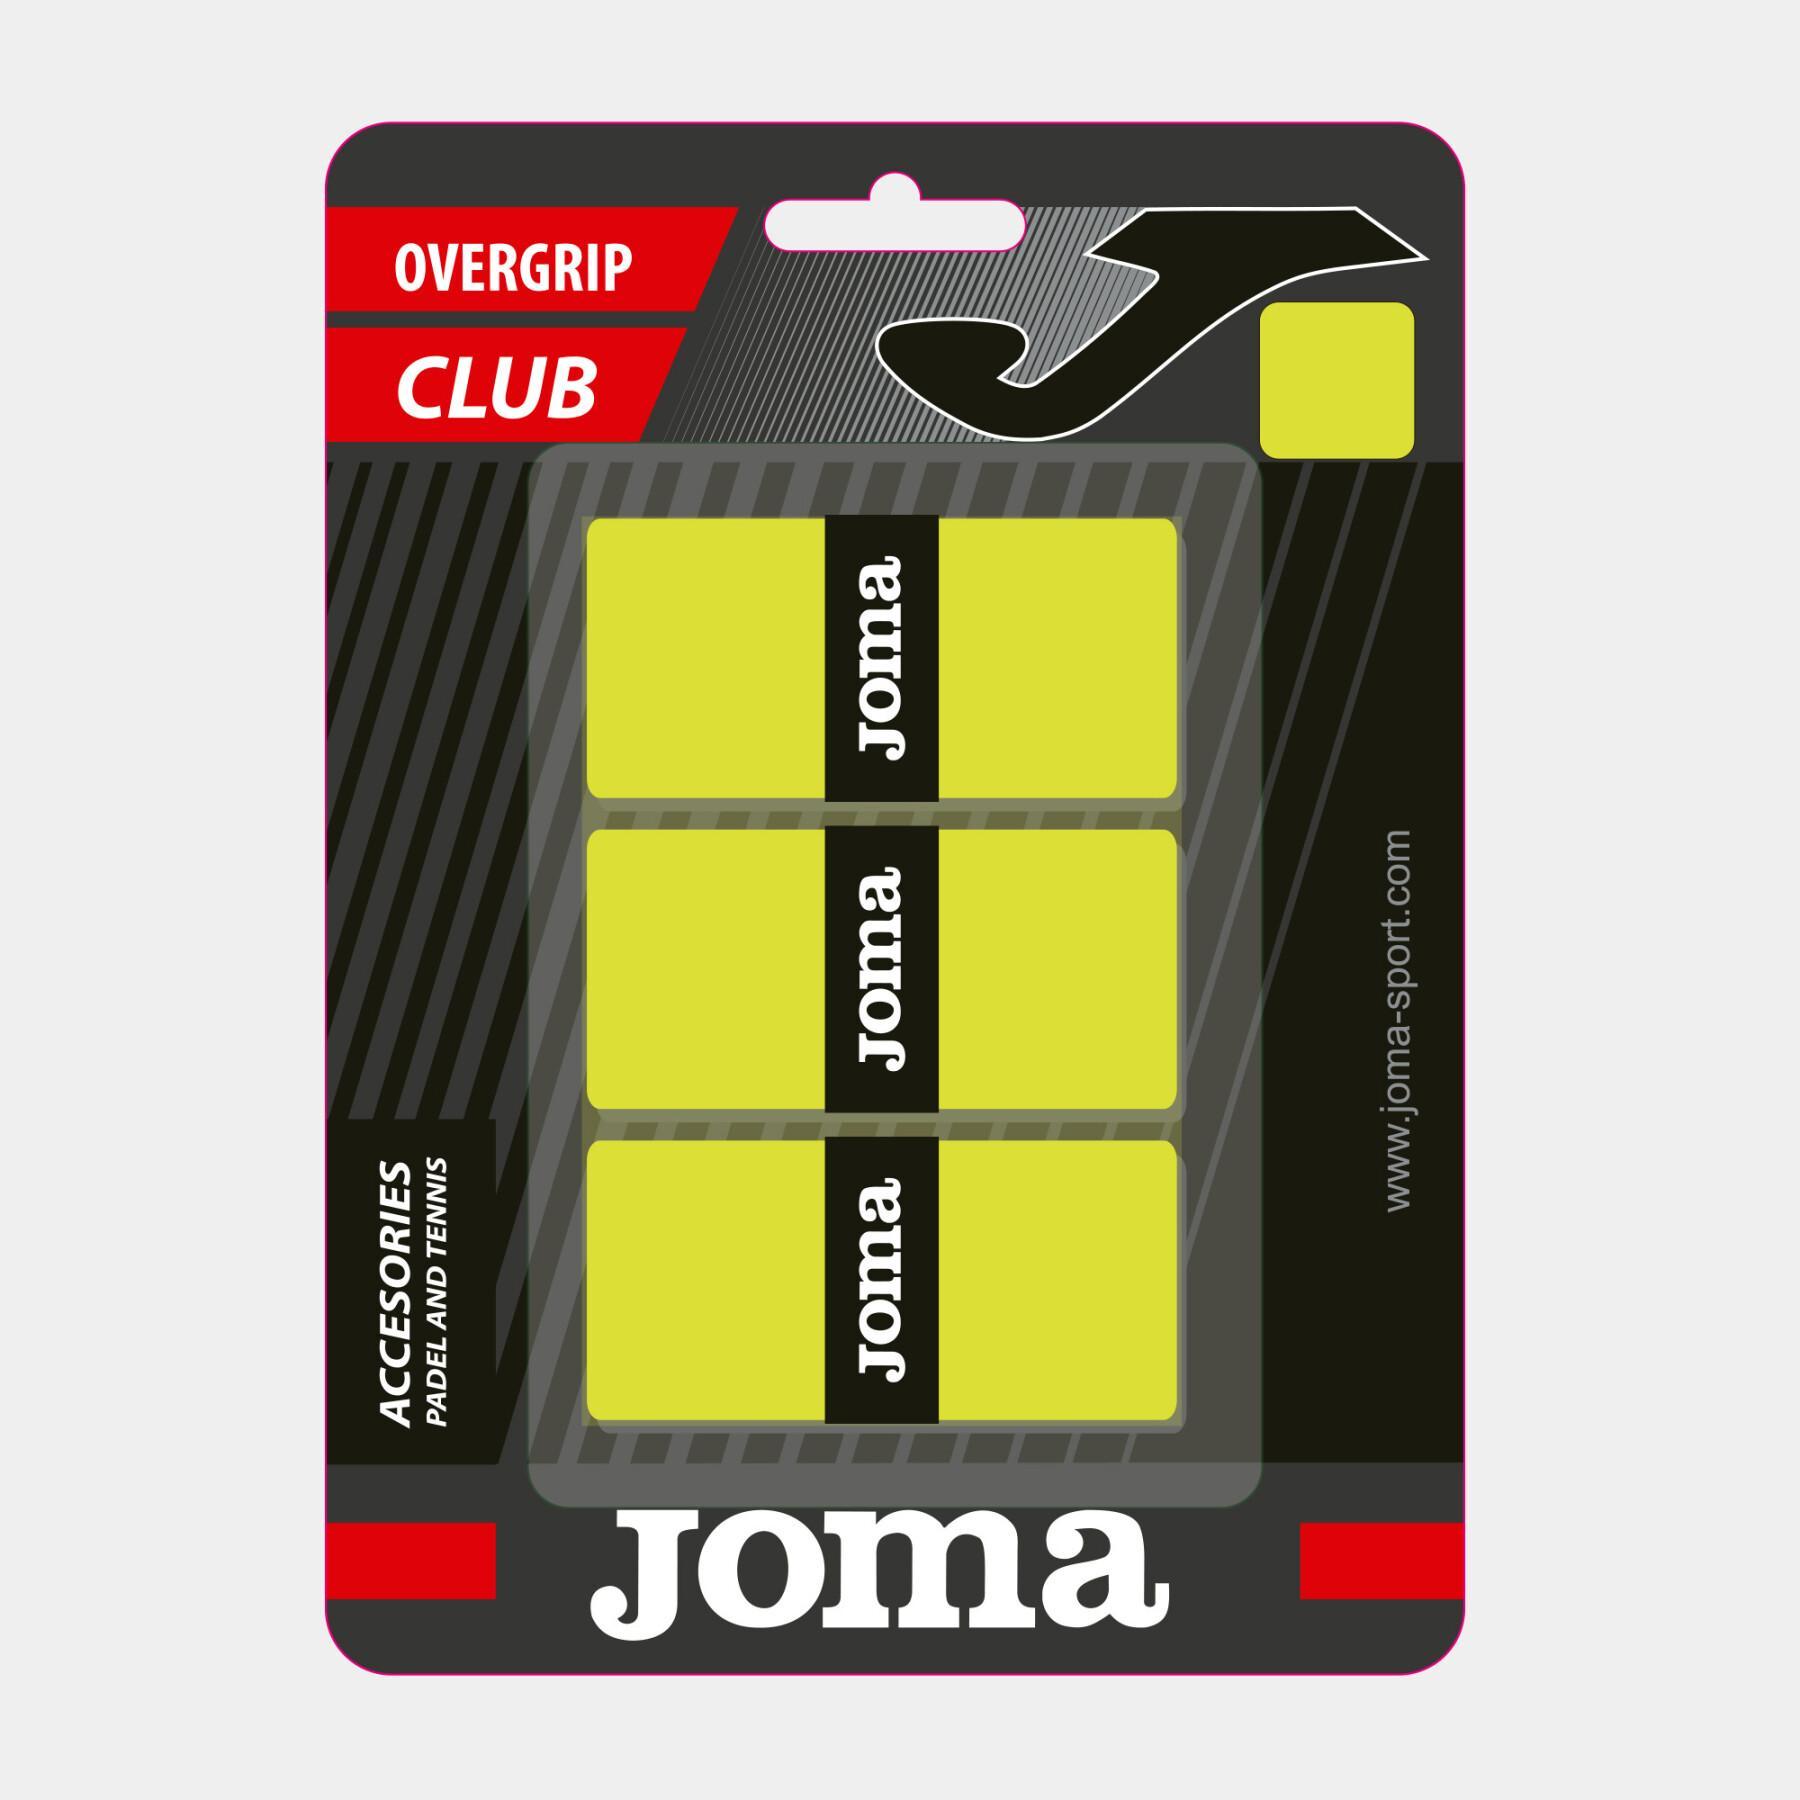 Surgrip Joma OGRIP CLUB CUHSION